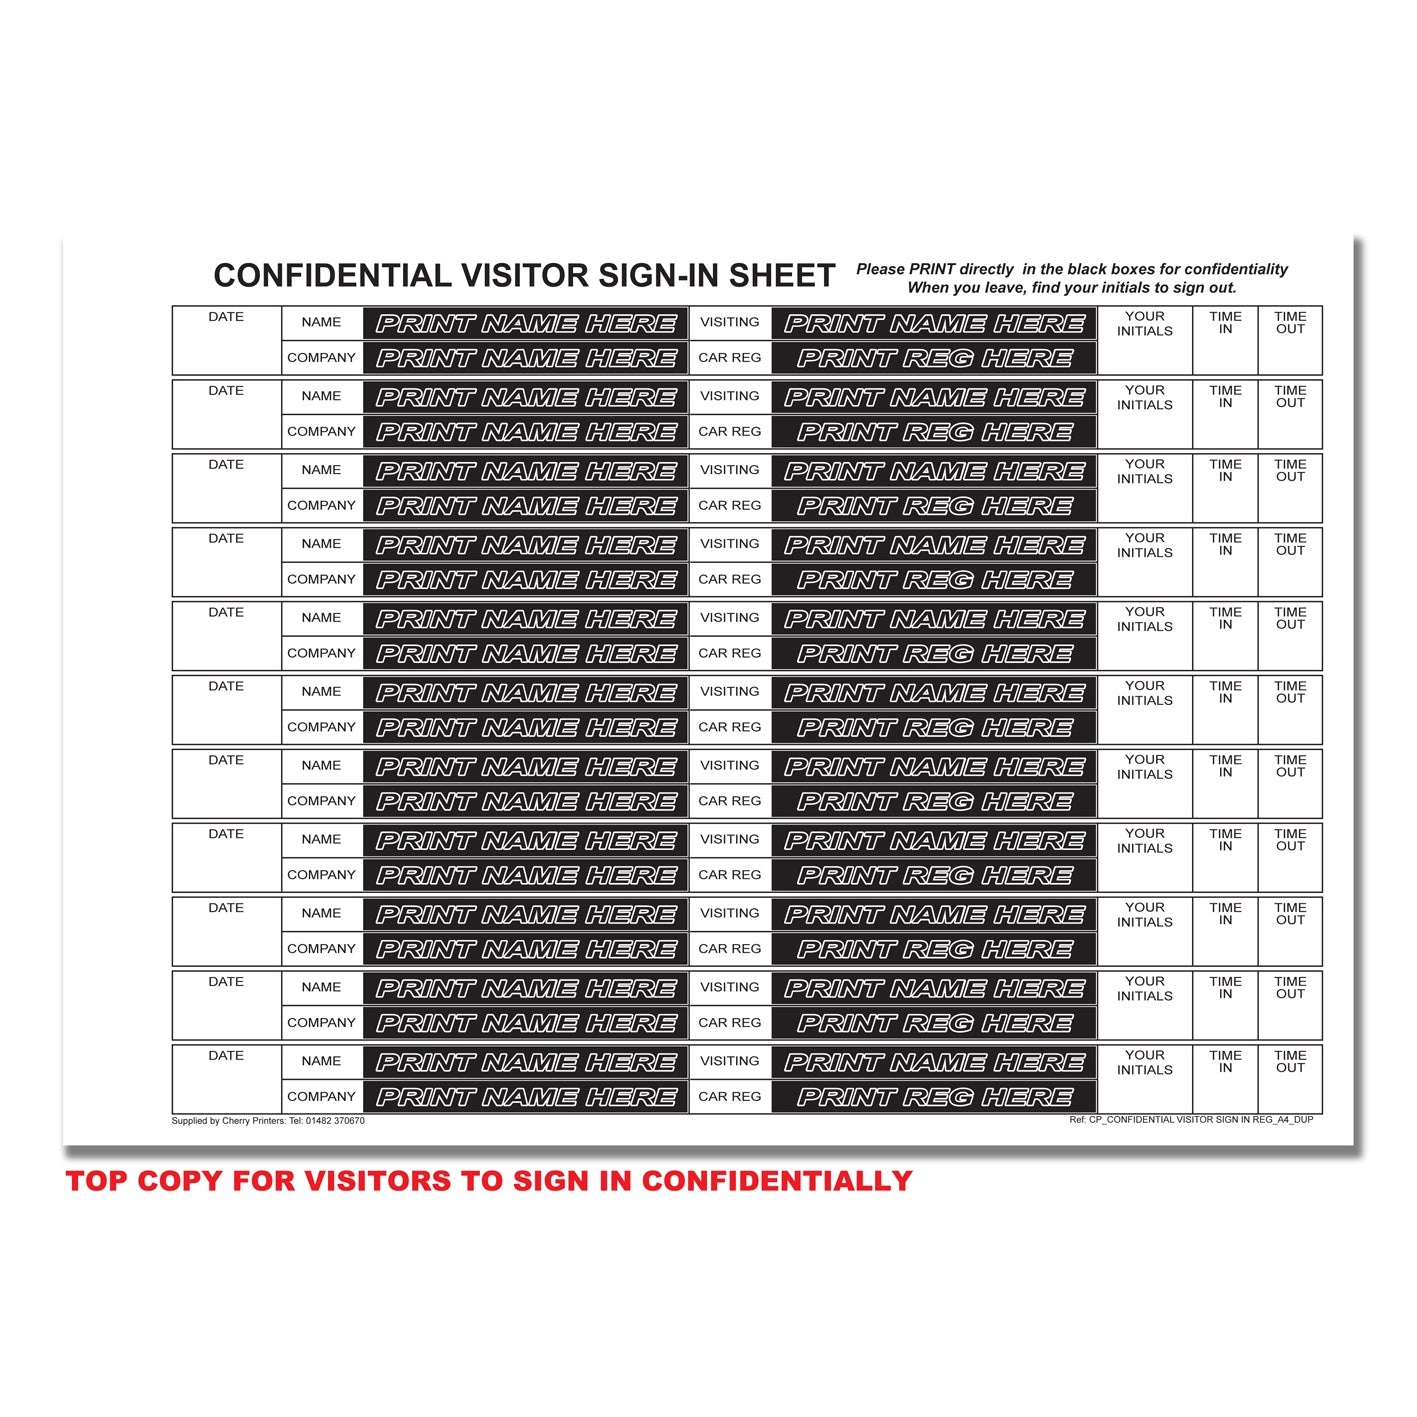 Confidential Visitor Sign In Log Book with Car Reg | Duplicate | 2 part | Carbonless | A4 - 8.27" x 11.69" | BOX OF 20 BOOKS